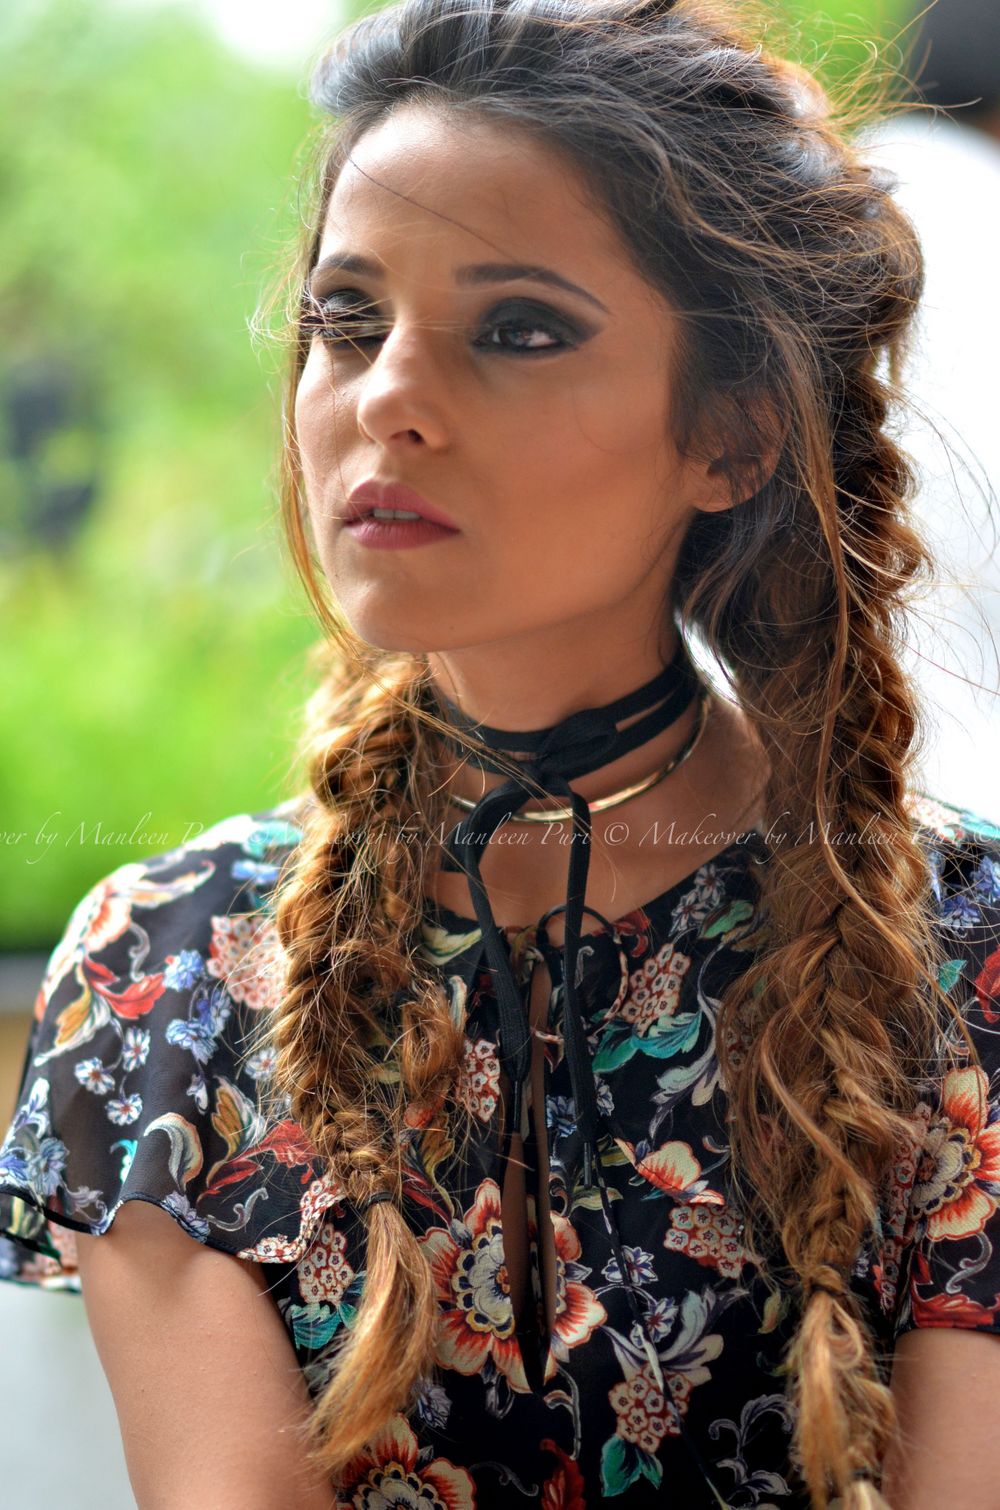 Photo From BOHO inspired Blog Shoot - By Makeover by Manleen Puri